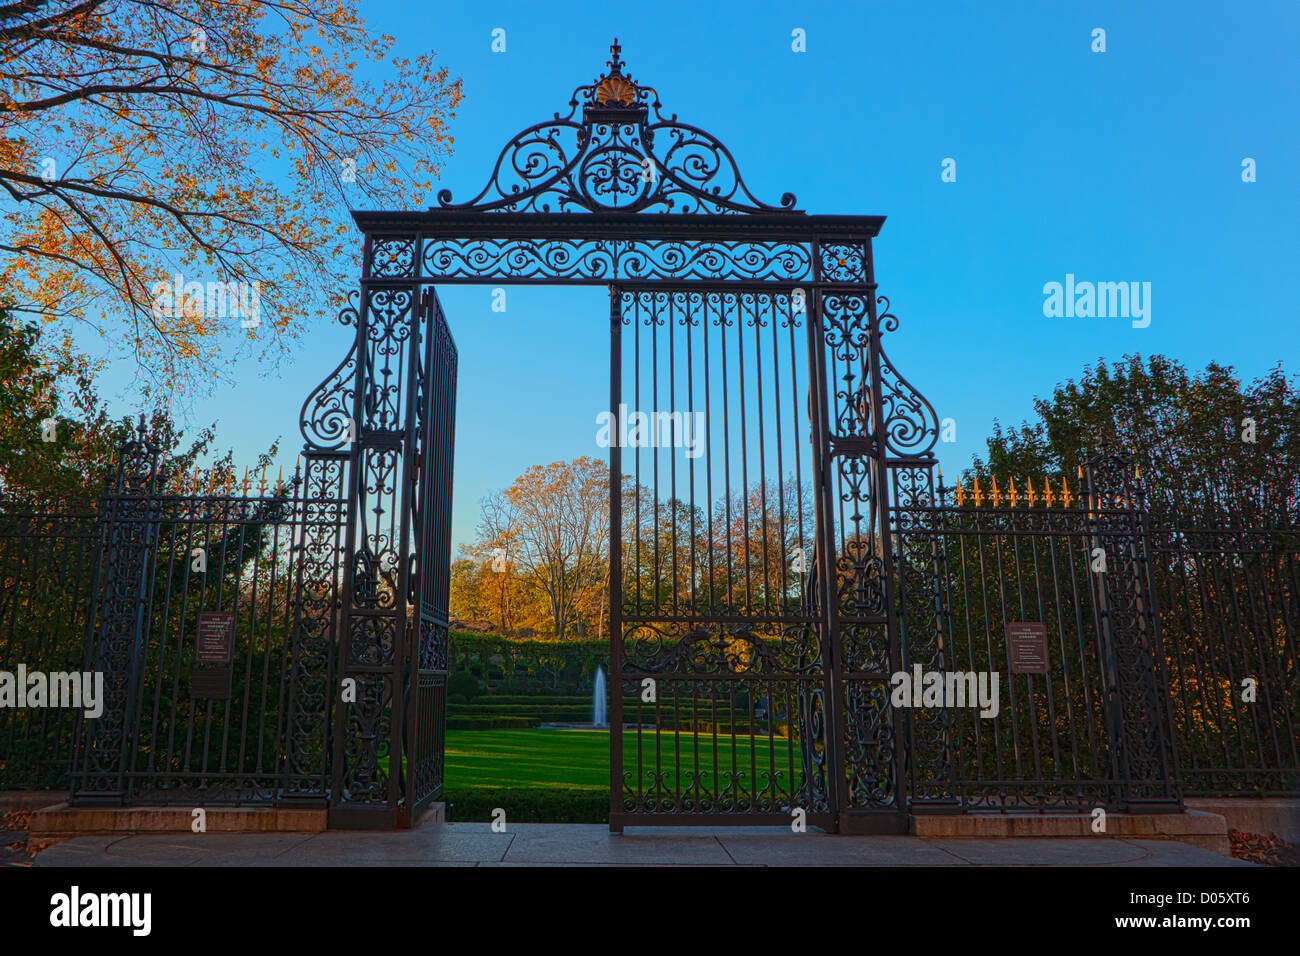 The Vanderbilt Gate is considered one of the finest examples of wrought iron work in New York City, New York, USA Stock Photo